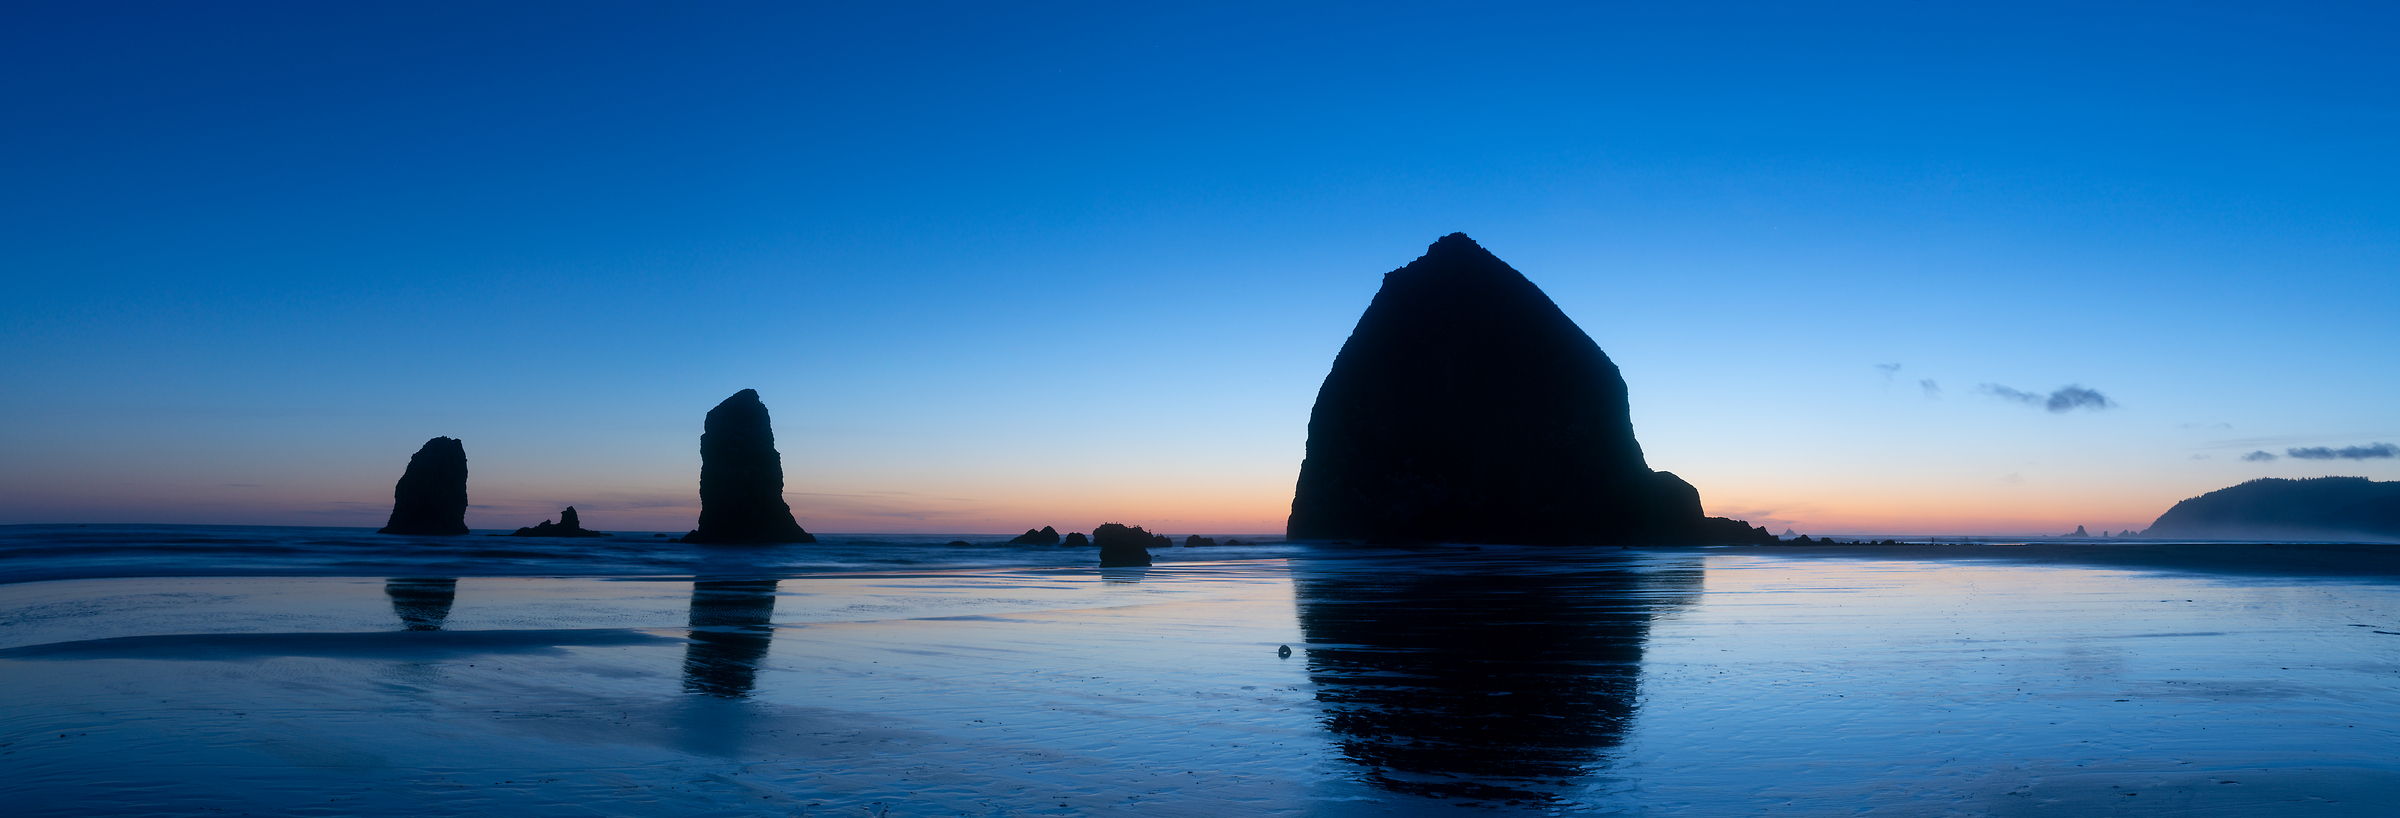 320 megapixels! A very high resolution, large-format VAST photo print of a coastline in the Pacific Northwest at twilight with large rock monoliths; photograph created by Greg Probst in Cannon Beach, Oregon, USA